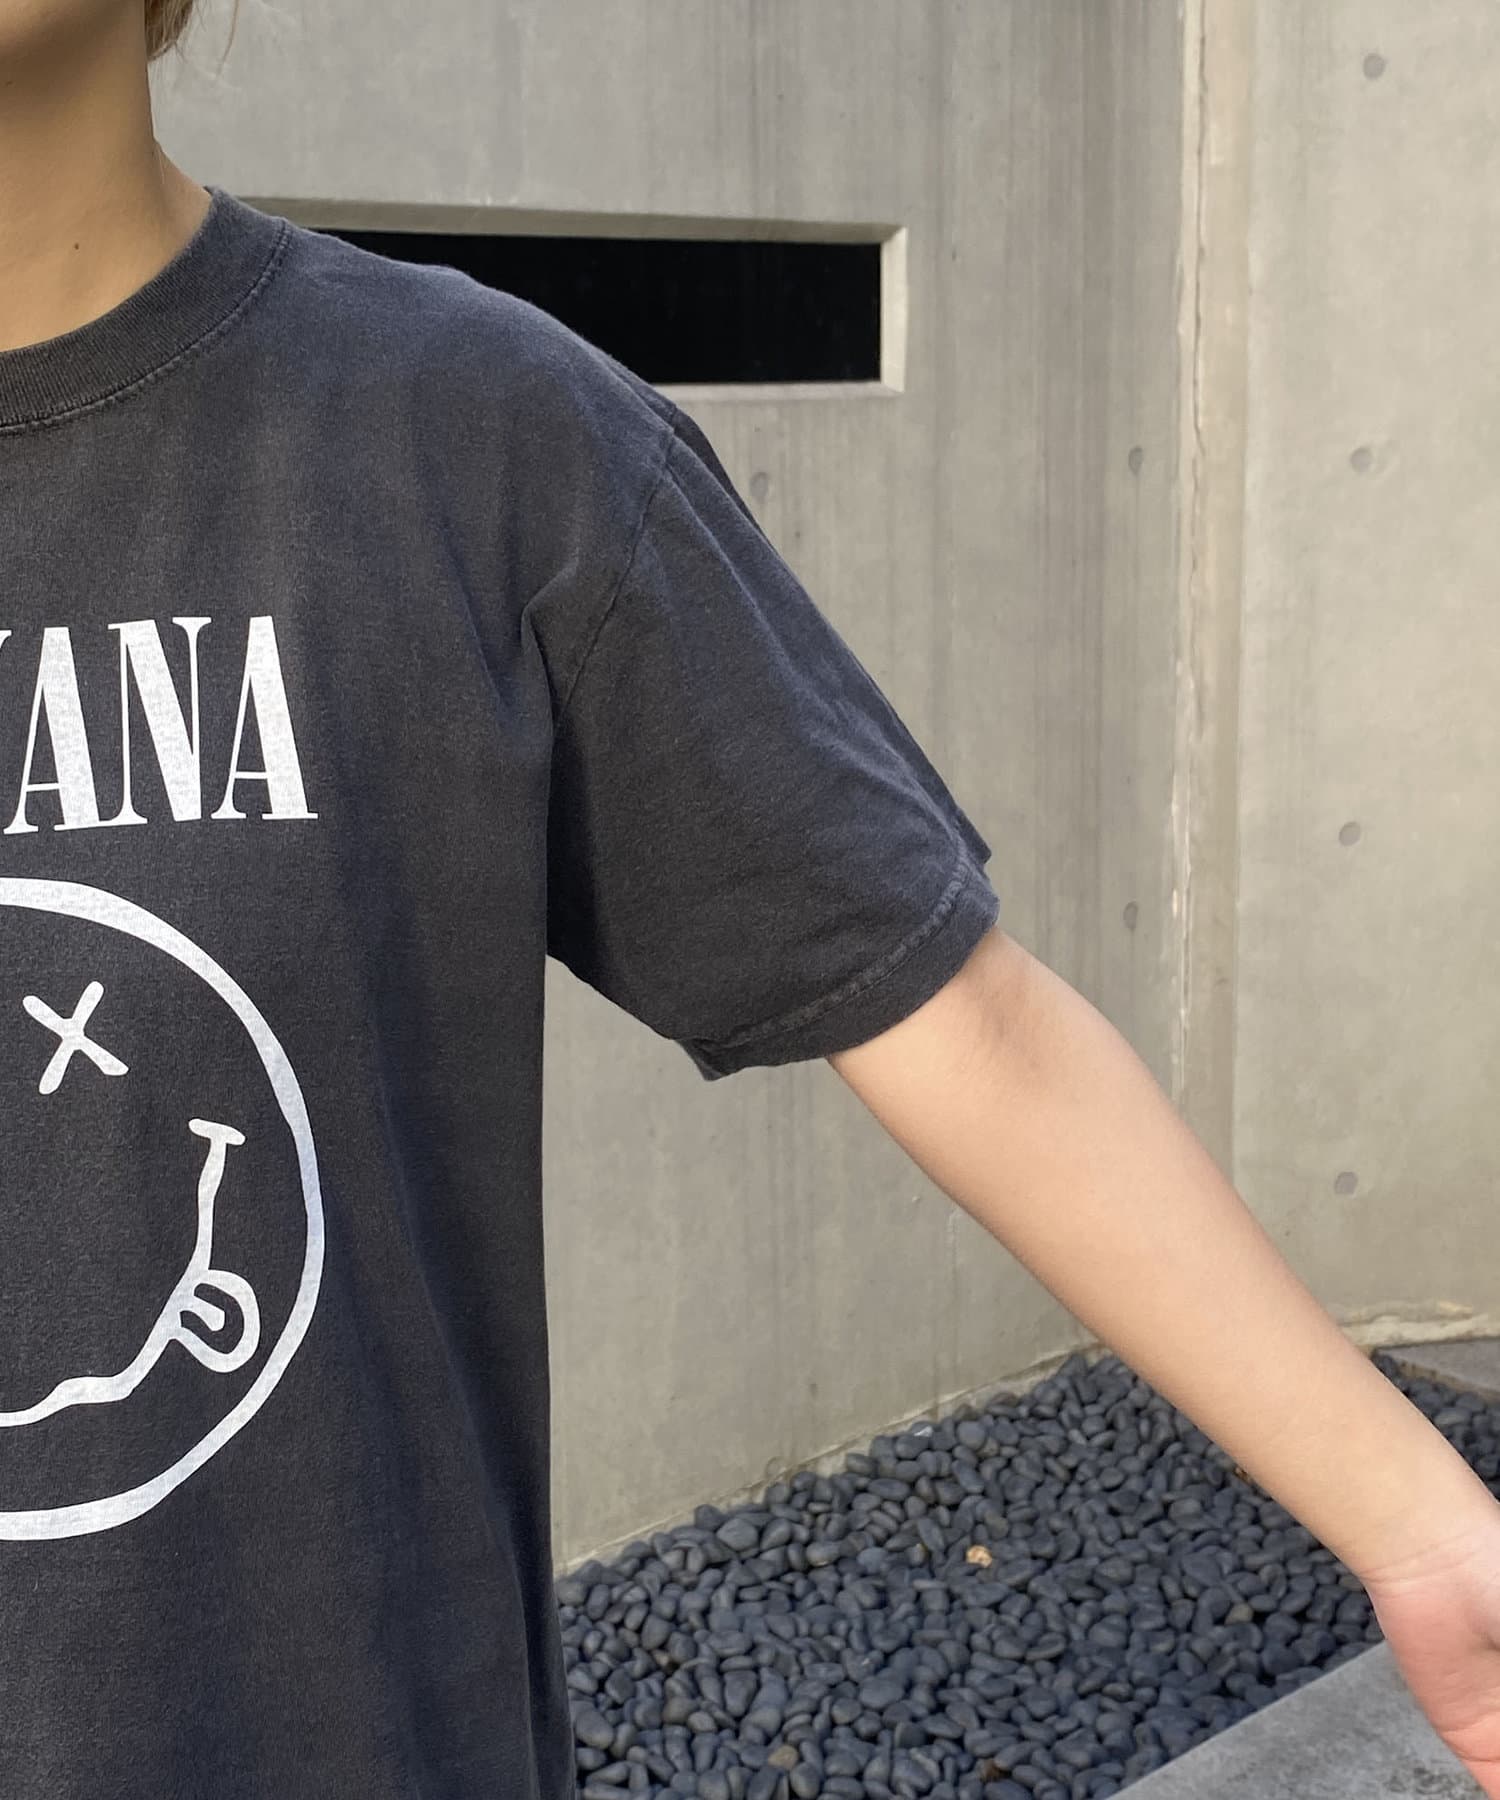 CAPRICIEUX LE'MAGE(カプリシュレマージュ) 〈GOOD ROCK SPEED〉NIRVANA Tシャツ